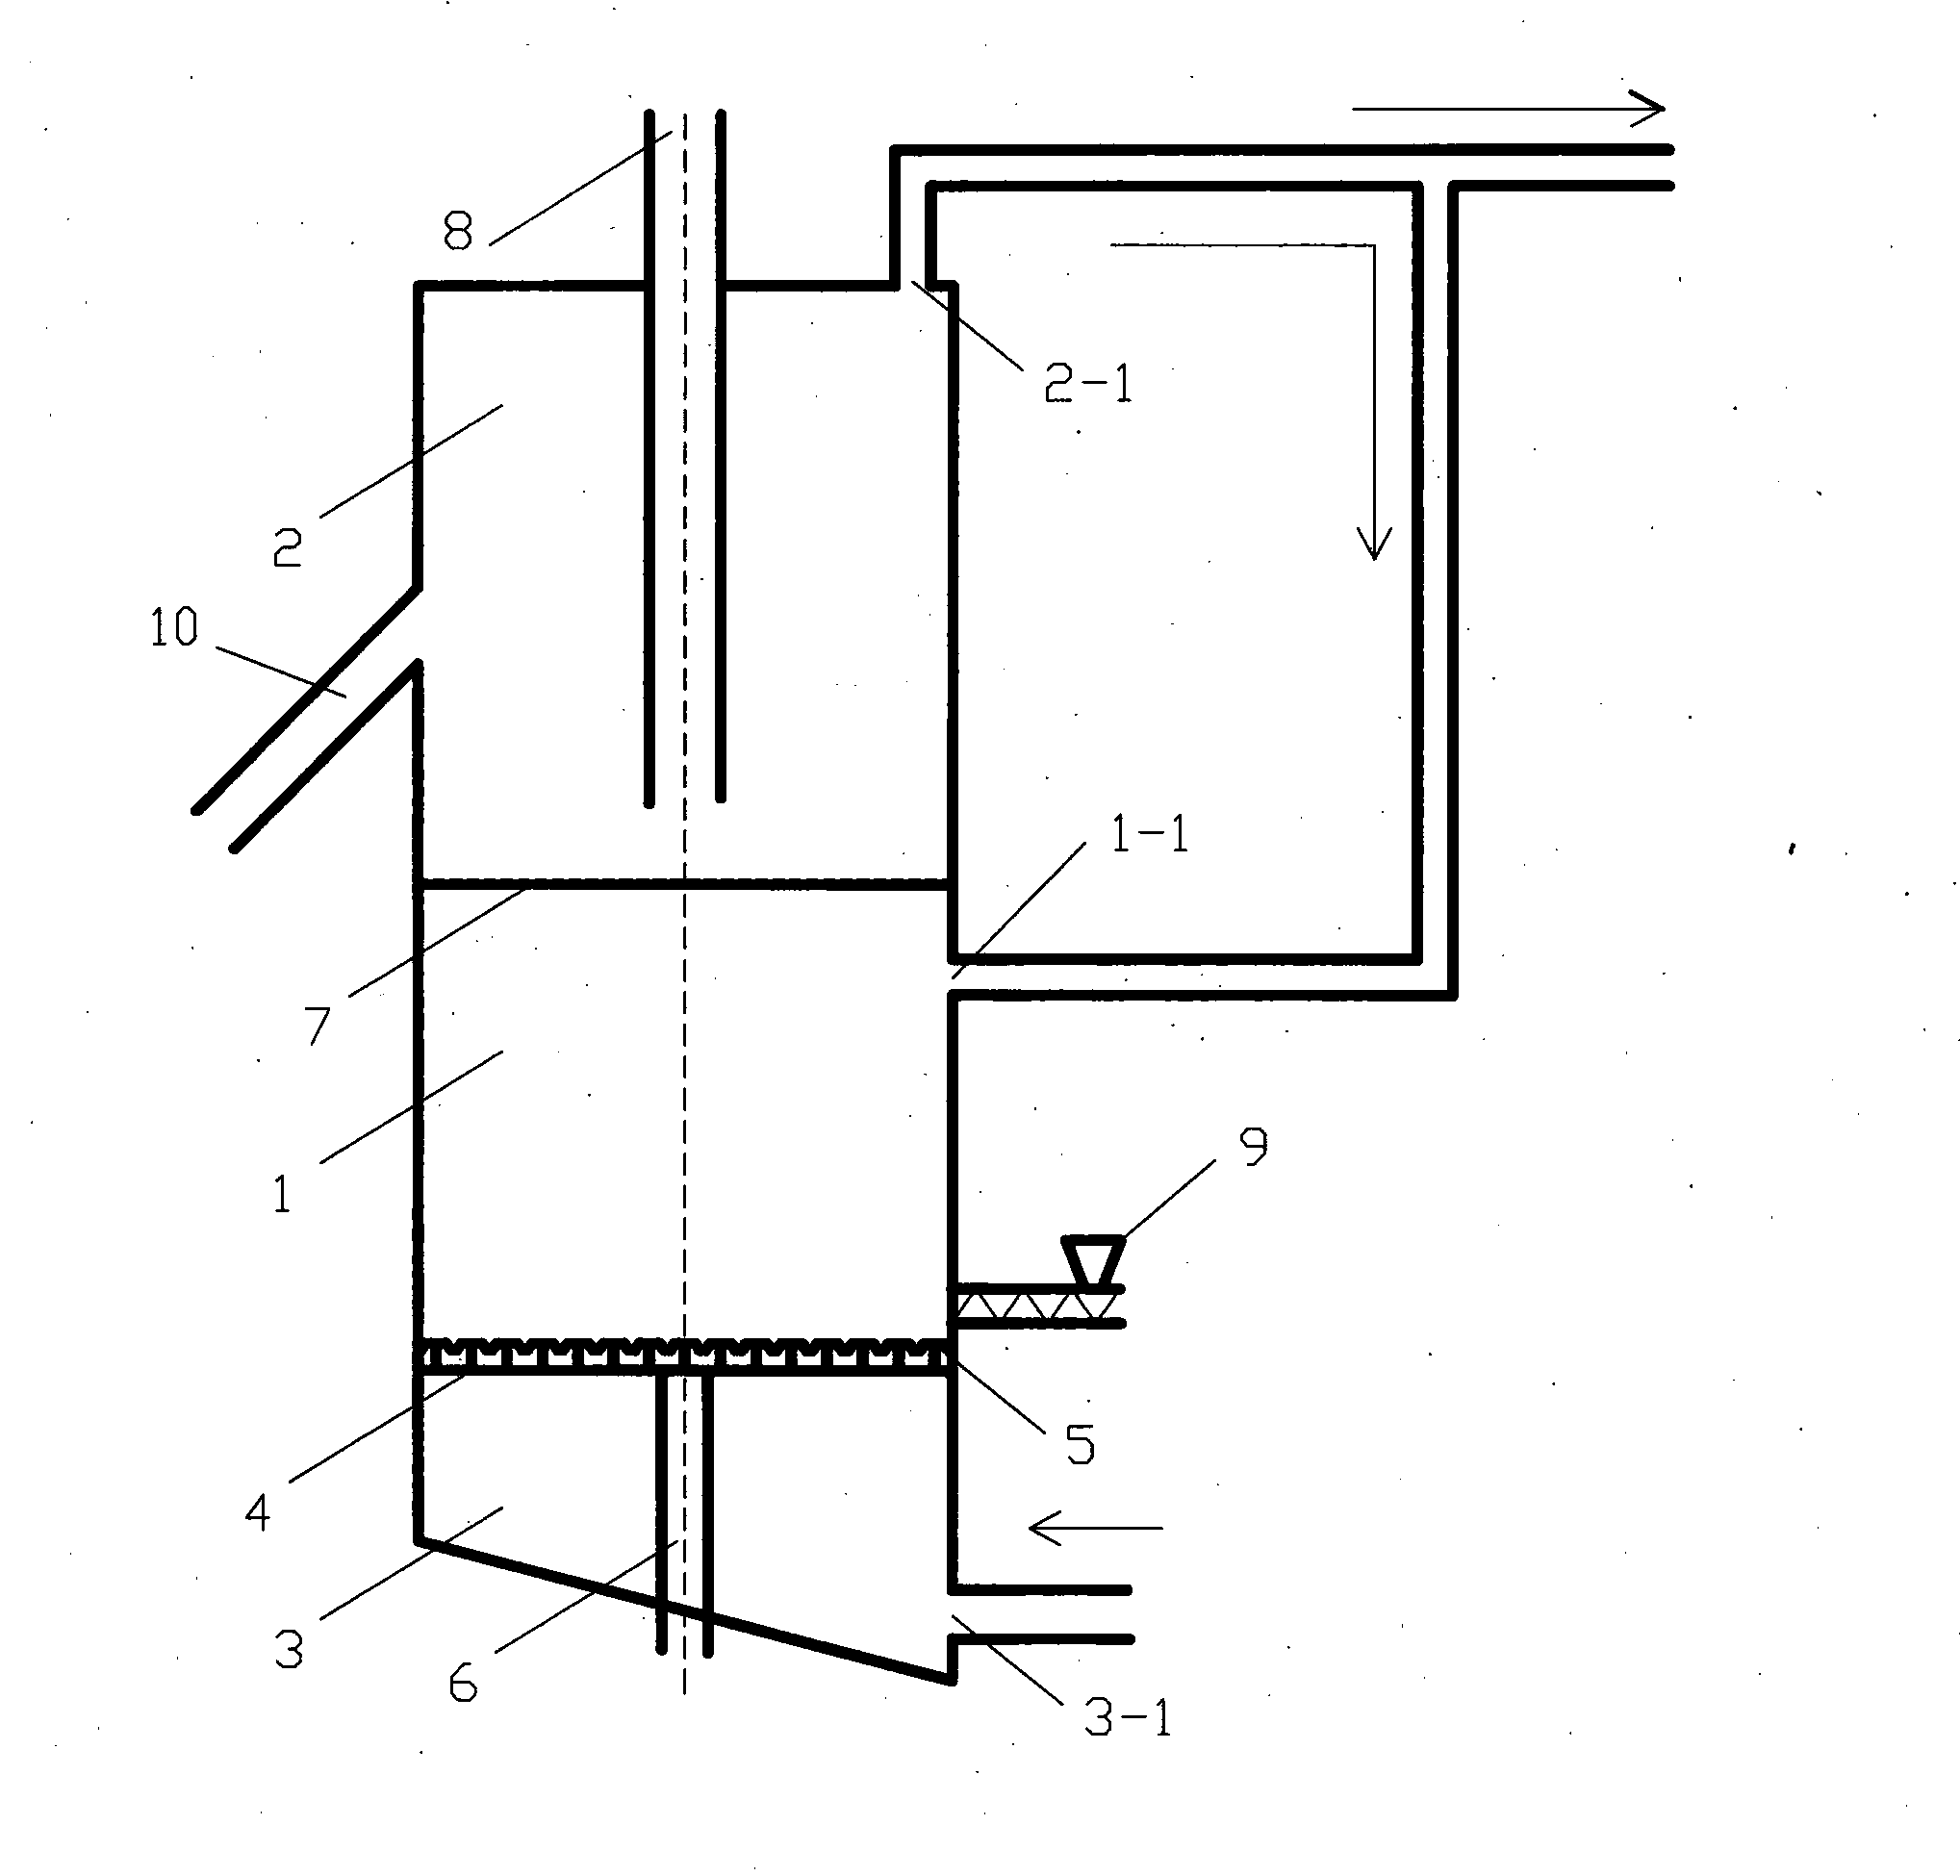 Two-stage fuel reactor structure and technological process